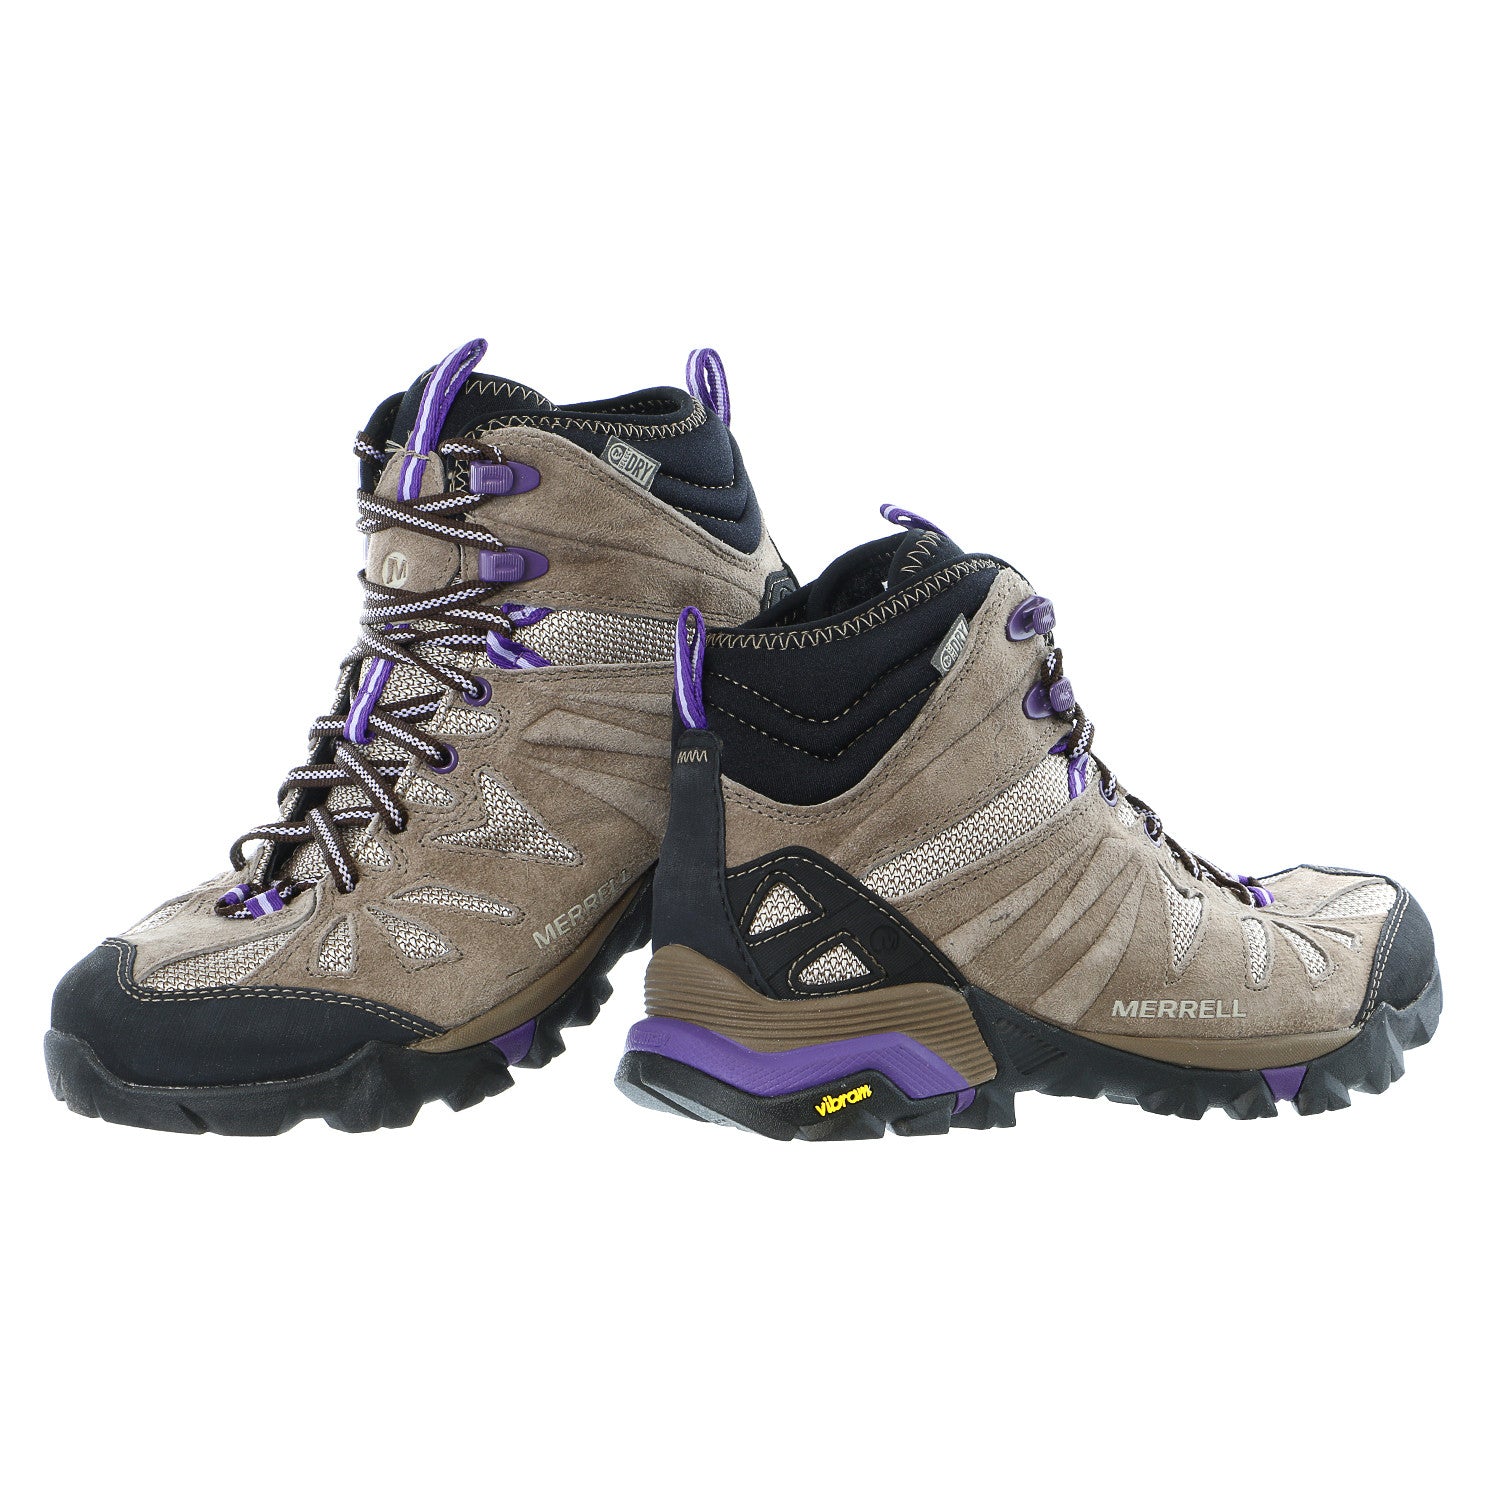 How to Lace Merrell Capra Mid Waterproof Hiking Boot?